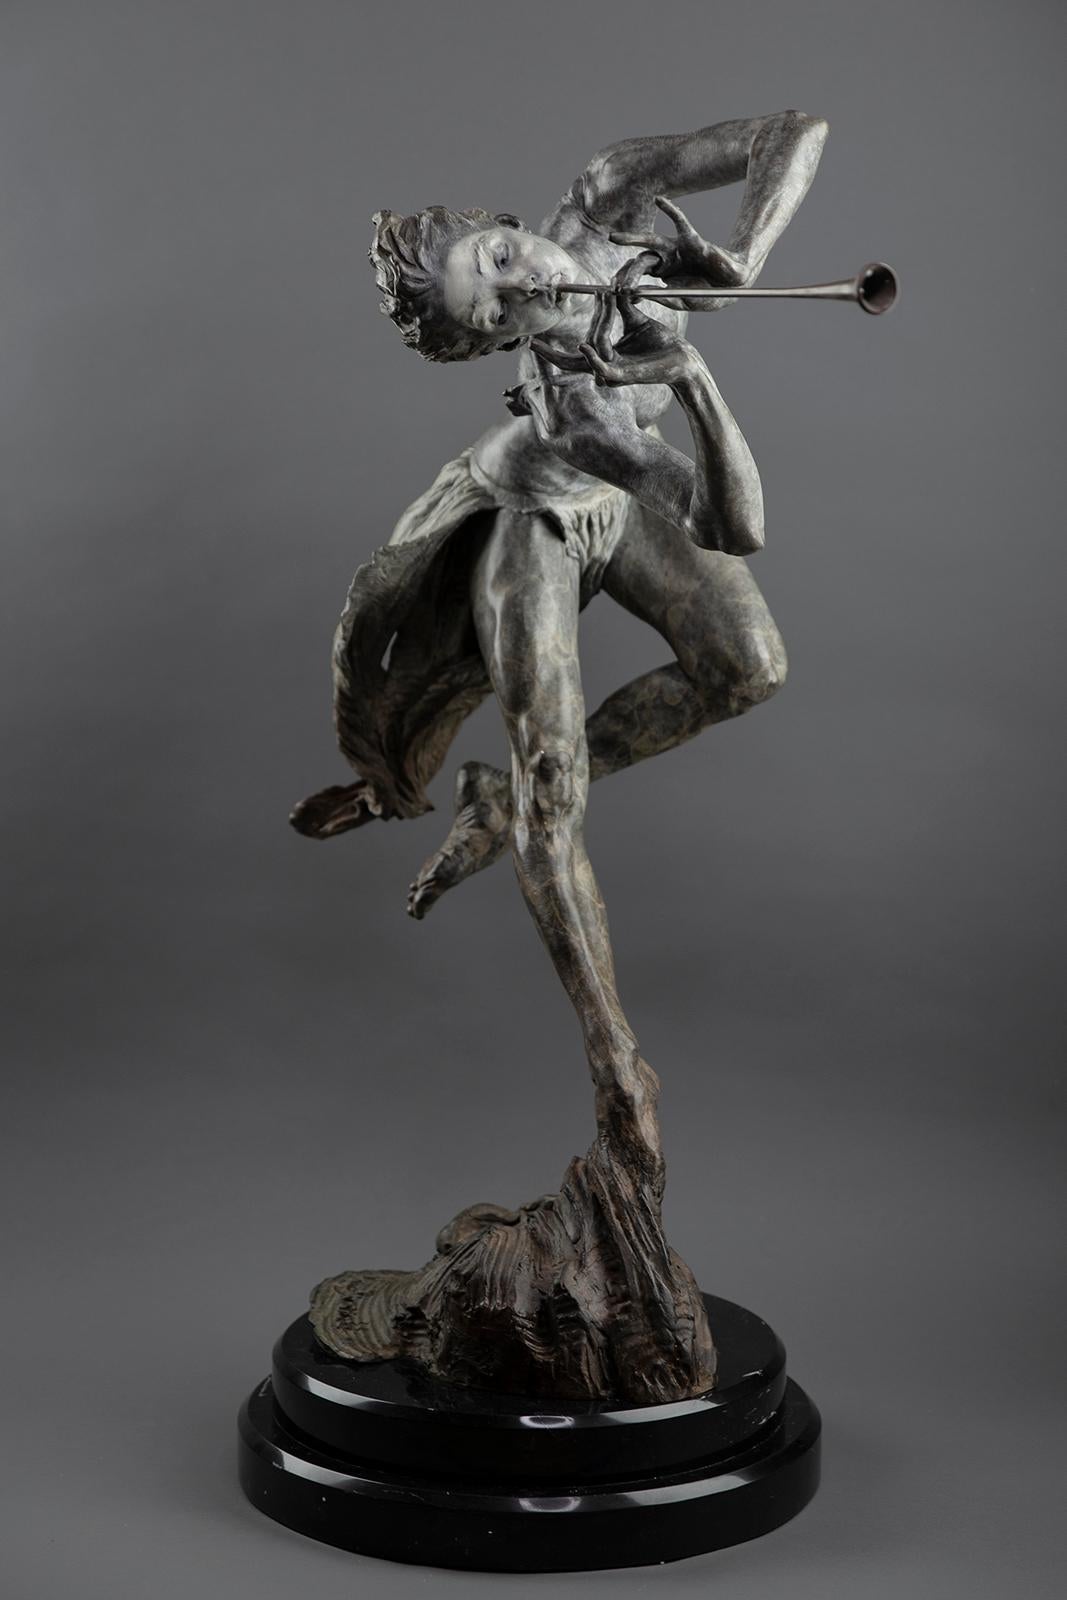 Artist: Richard MacDonald
Title: Trumpeter
Medium: Bronze Sculpture with Artist Created Patina
Size: 37" x 26 1/2" + 4" base
Year: 1996
Edition: xx/90
Certificate: Includes Gallery Certificate
Condition: Museum quality condition

About Richard